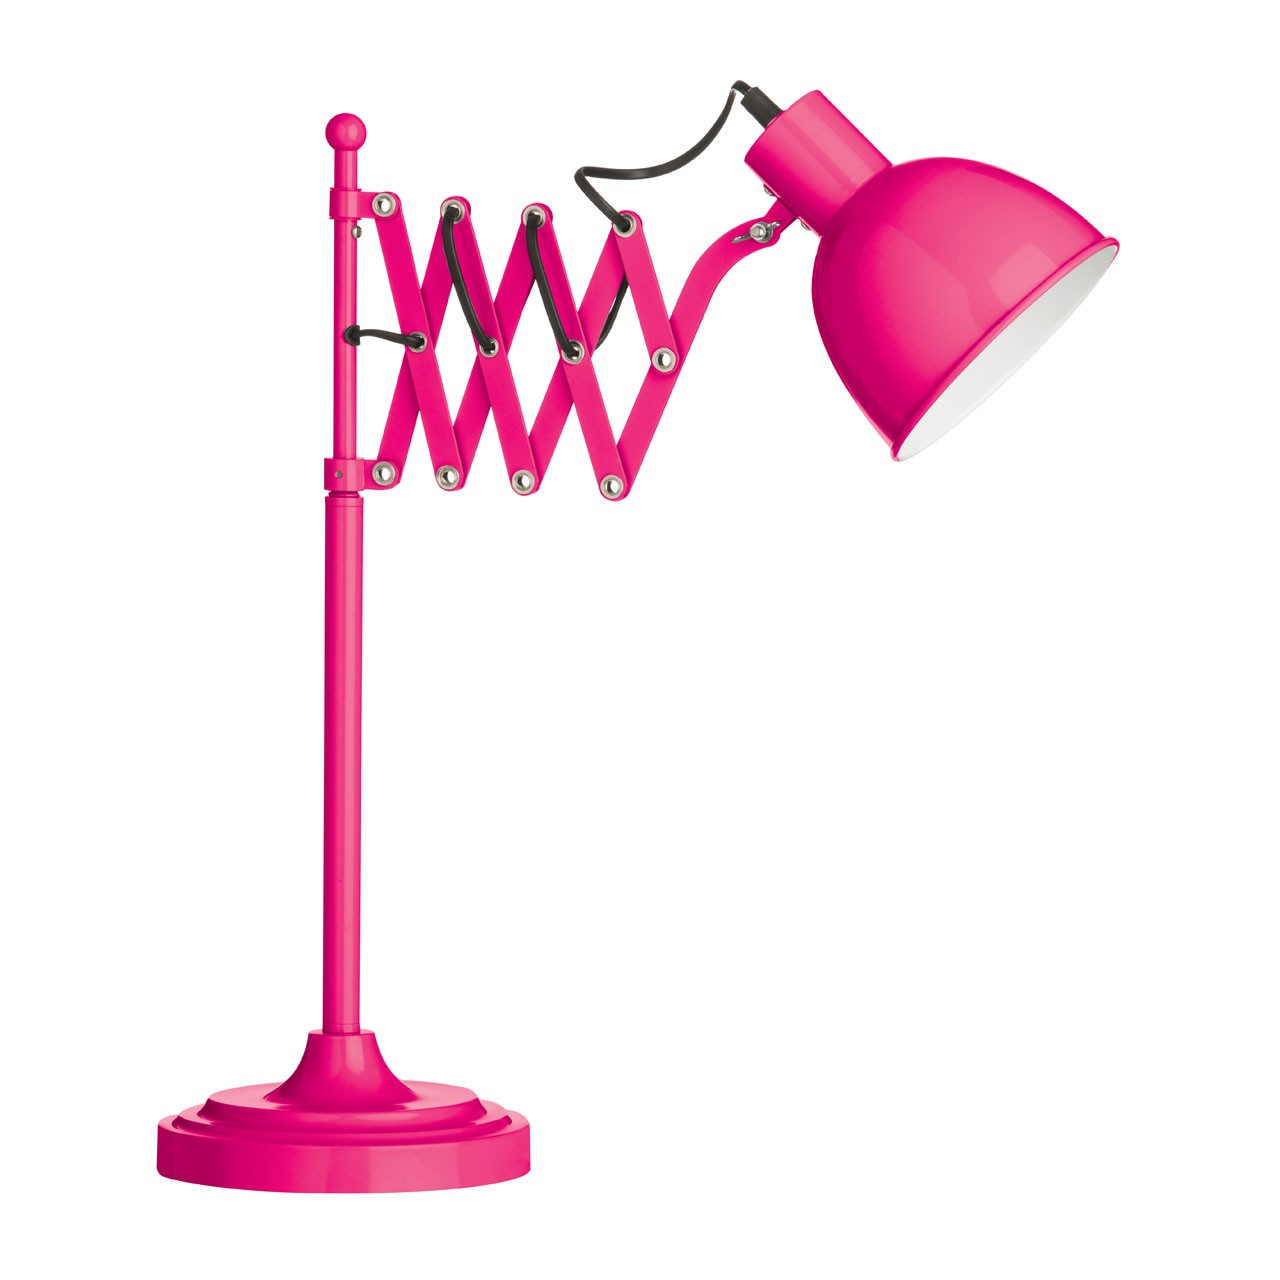 E27 Edison Screw 40 W Extendable Metal Table Lamp - Hot Pink